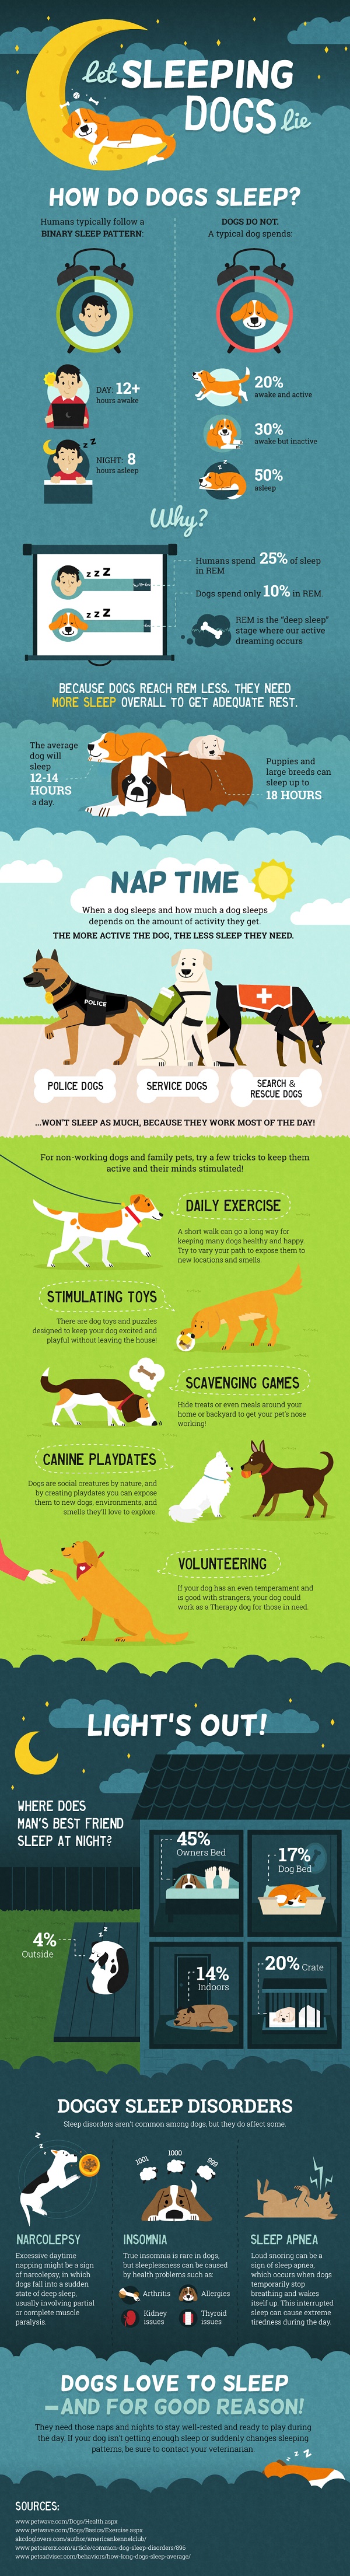 Dog Infographic: how much sleep do dogs need, let sleeping dogs lie infographic